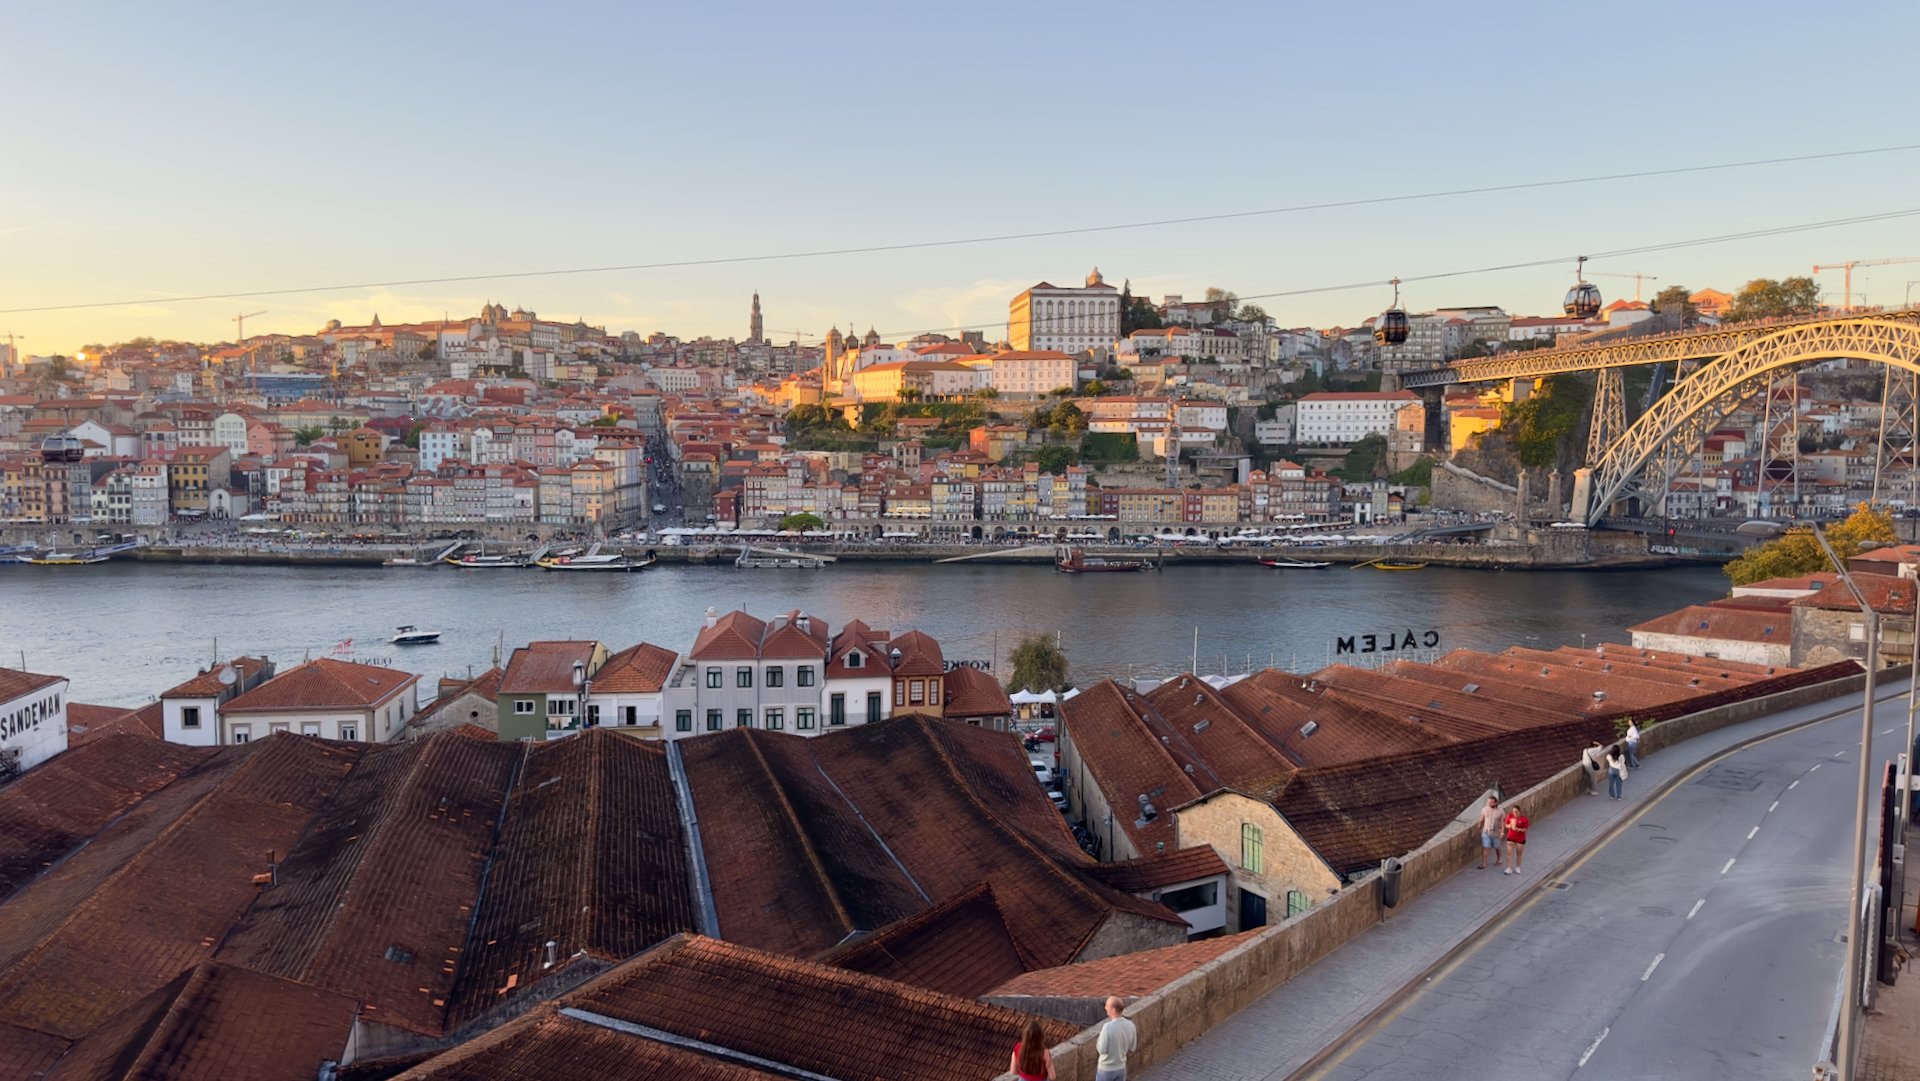  The sun started to set on our last night in Porto.  